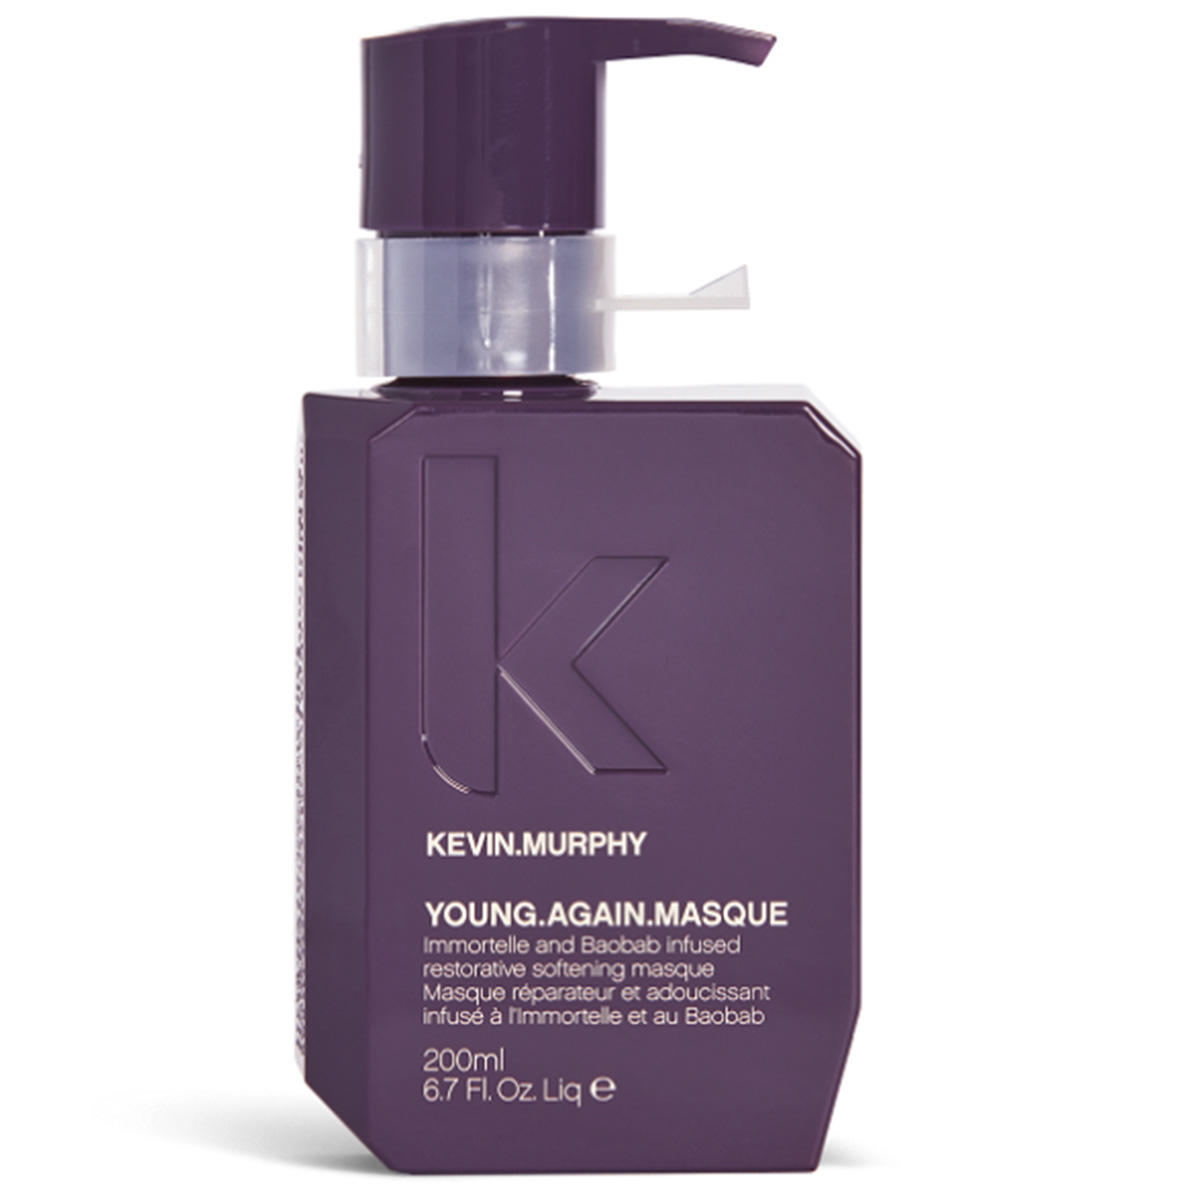 KEVIN.MURPHY YOUNG.AGAIN Masque  - 1